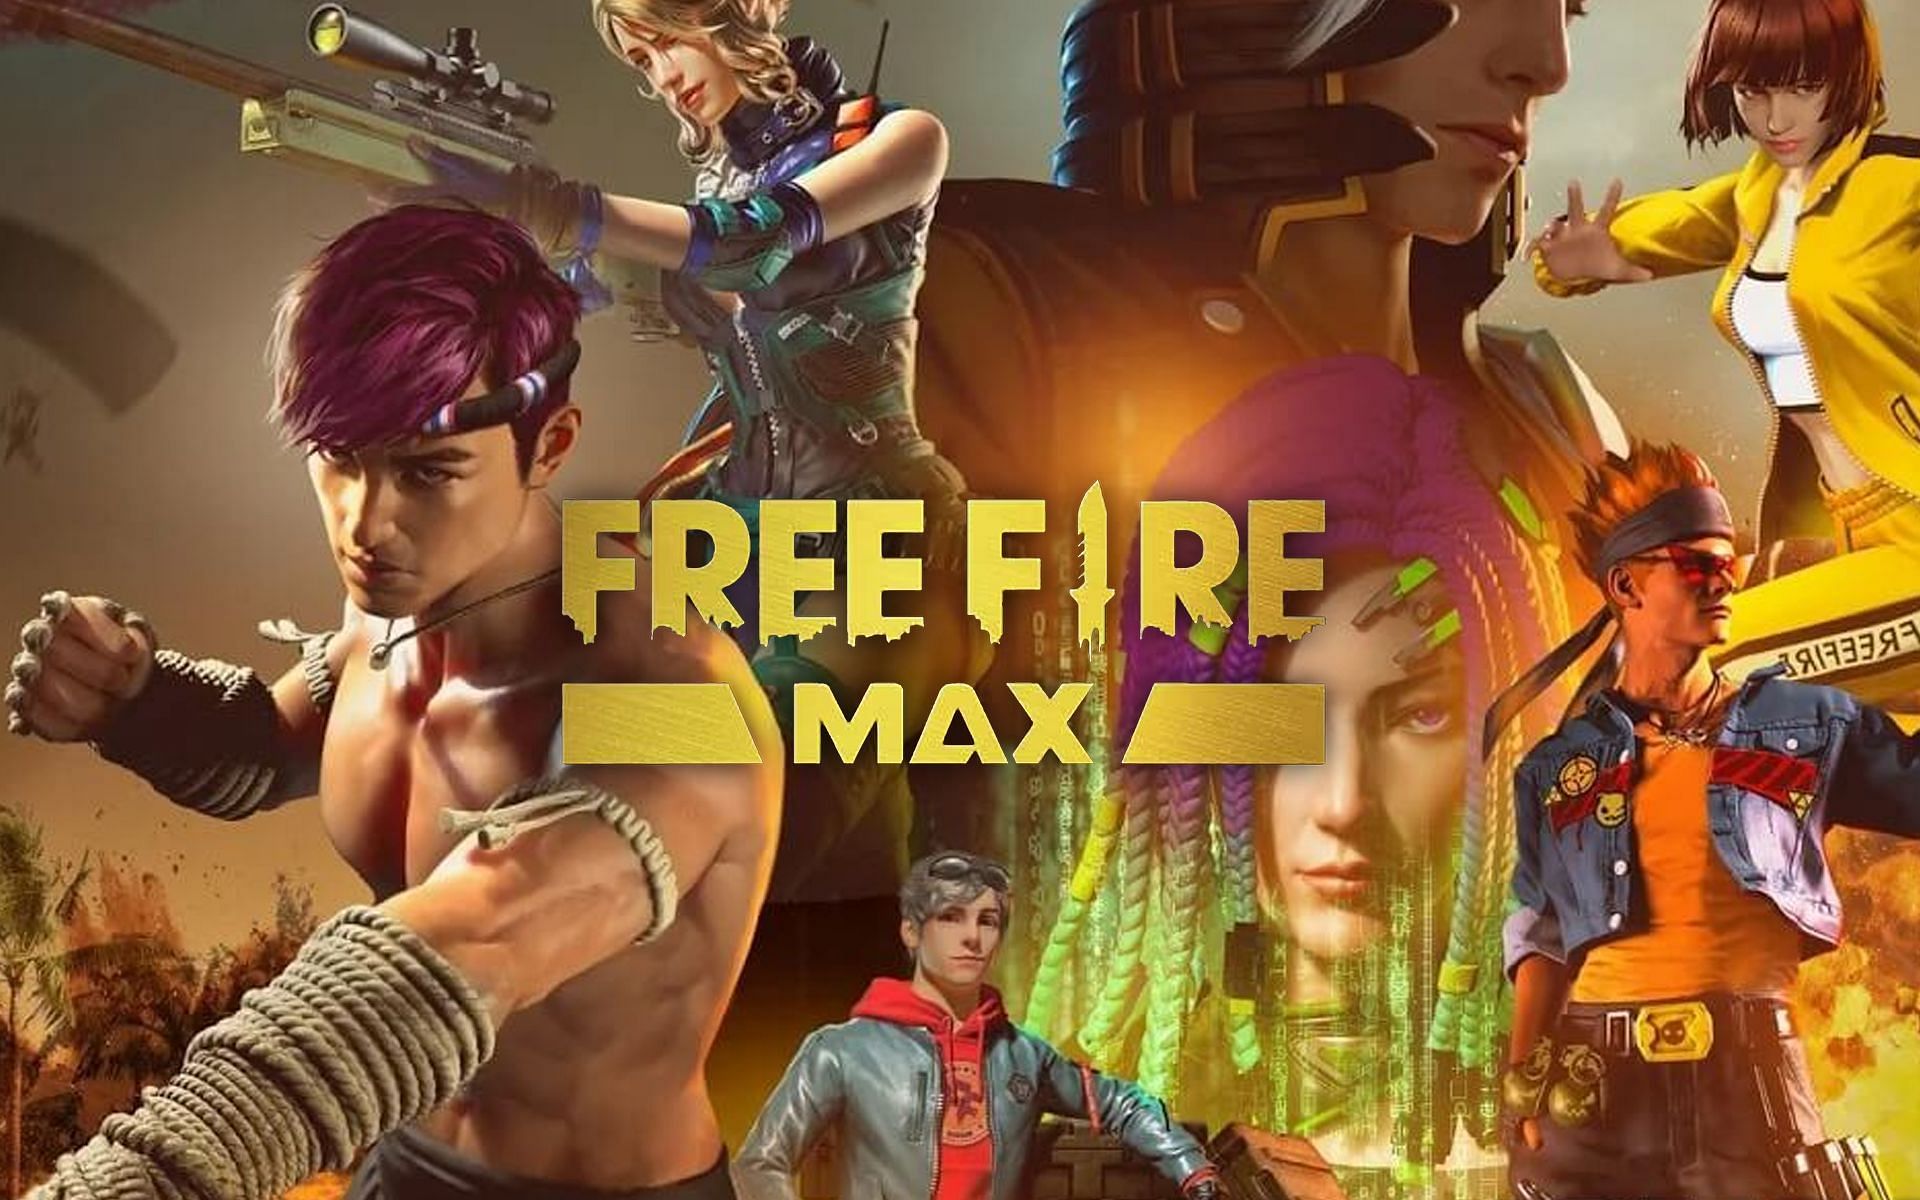 Top bundles to get in the store in Free Fire MAX right now (Image via Garena)